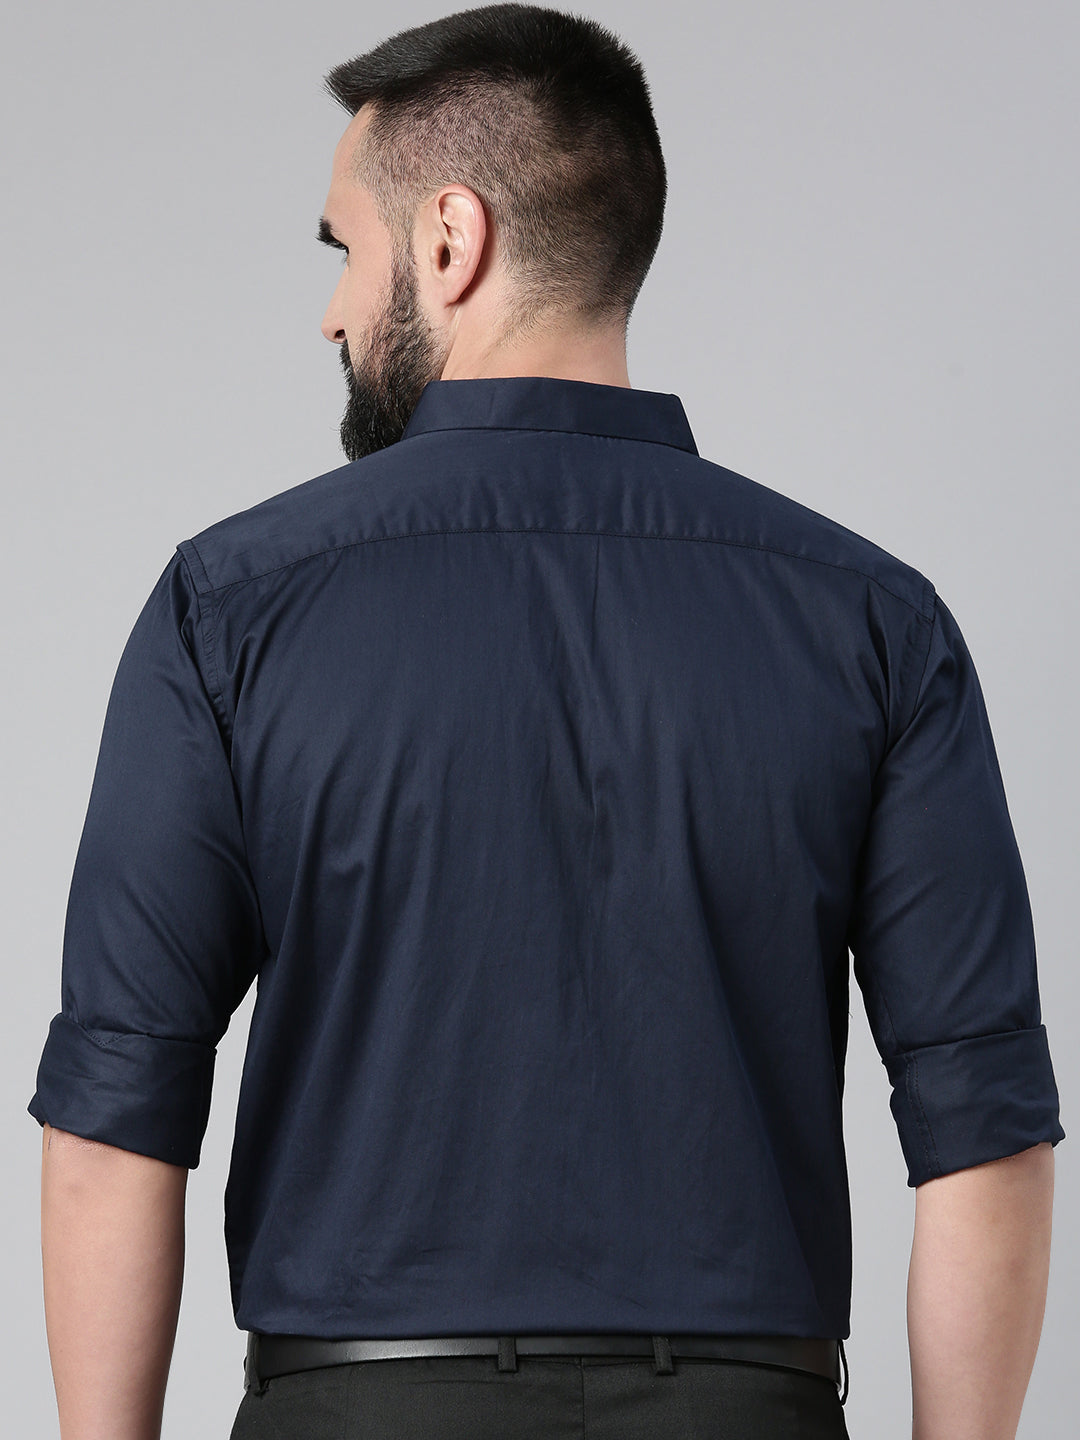 Paramount Pure Cotton Solid Shirt - Navy Blue